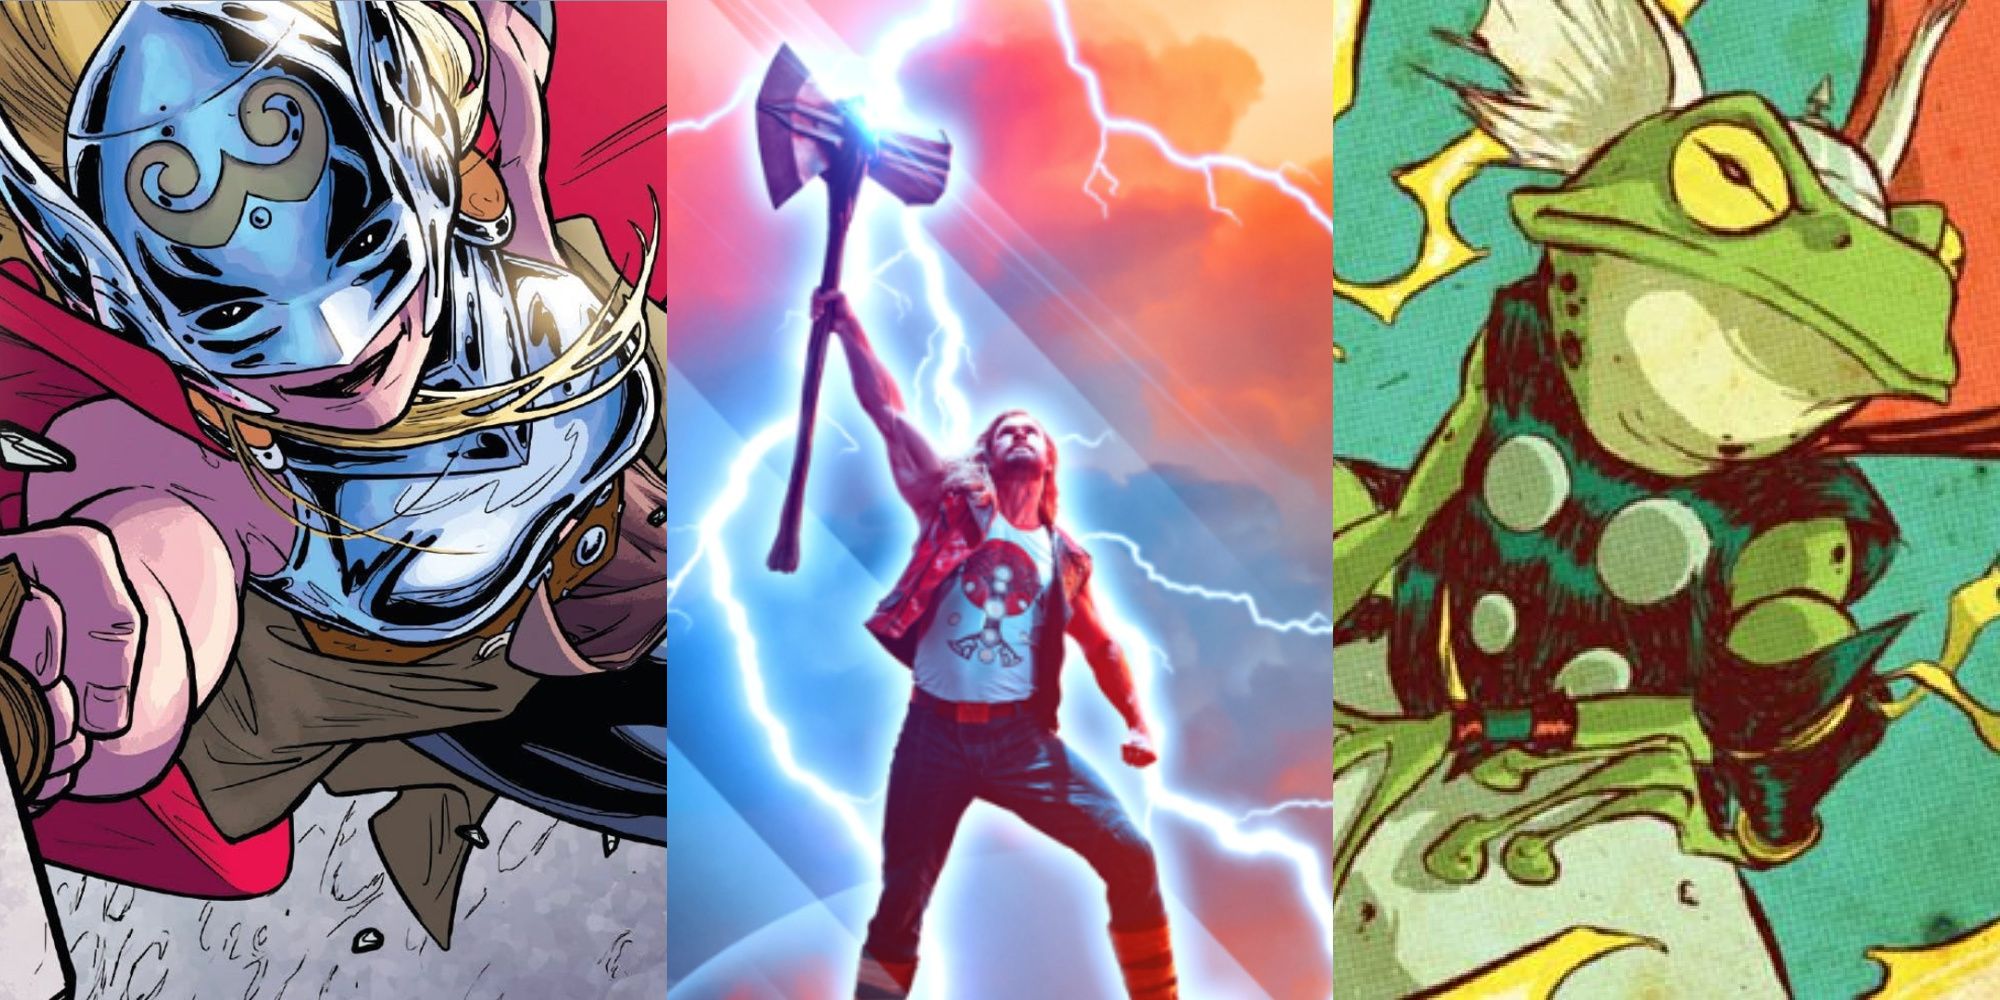 Split image of Jane Foster Thor from Marvel Comics, Thor from Love and Thunder, and Throg from Marvel Comics.